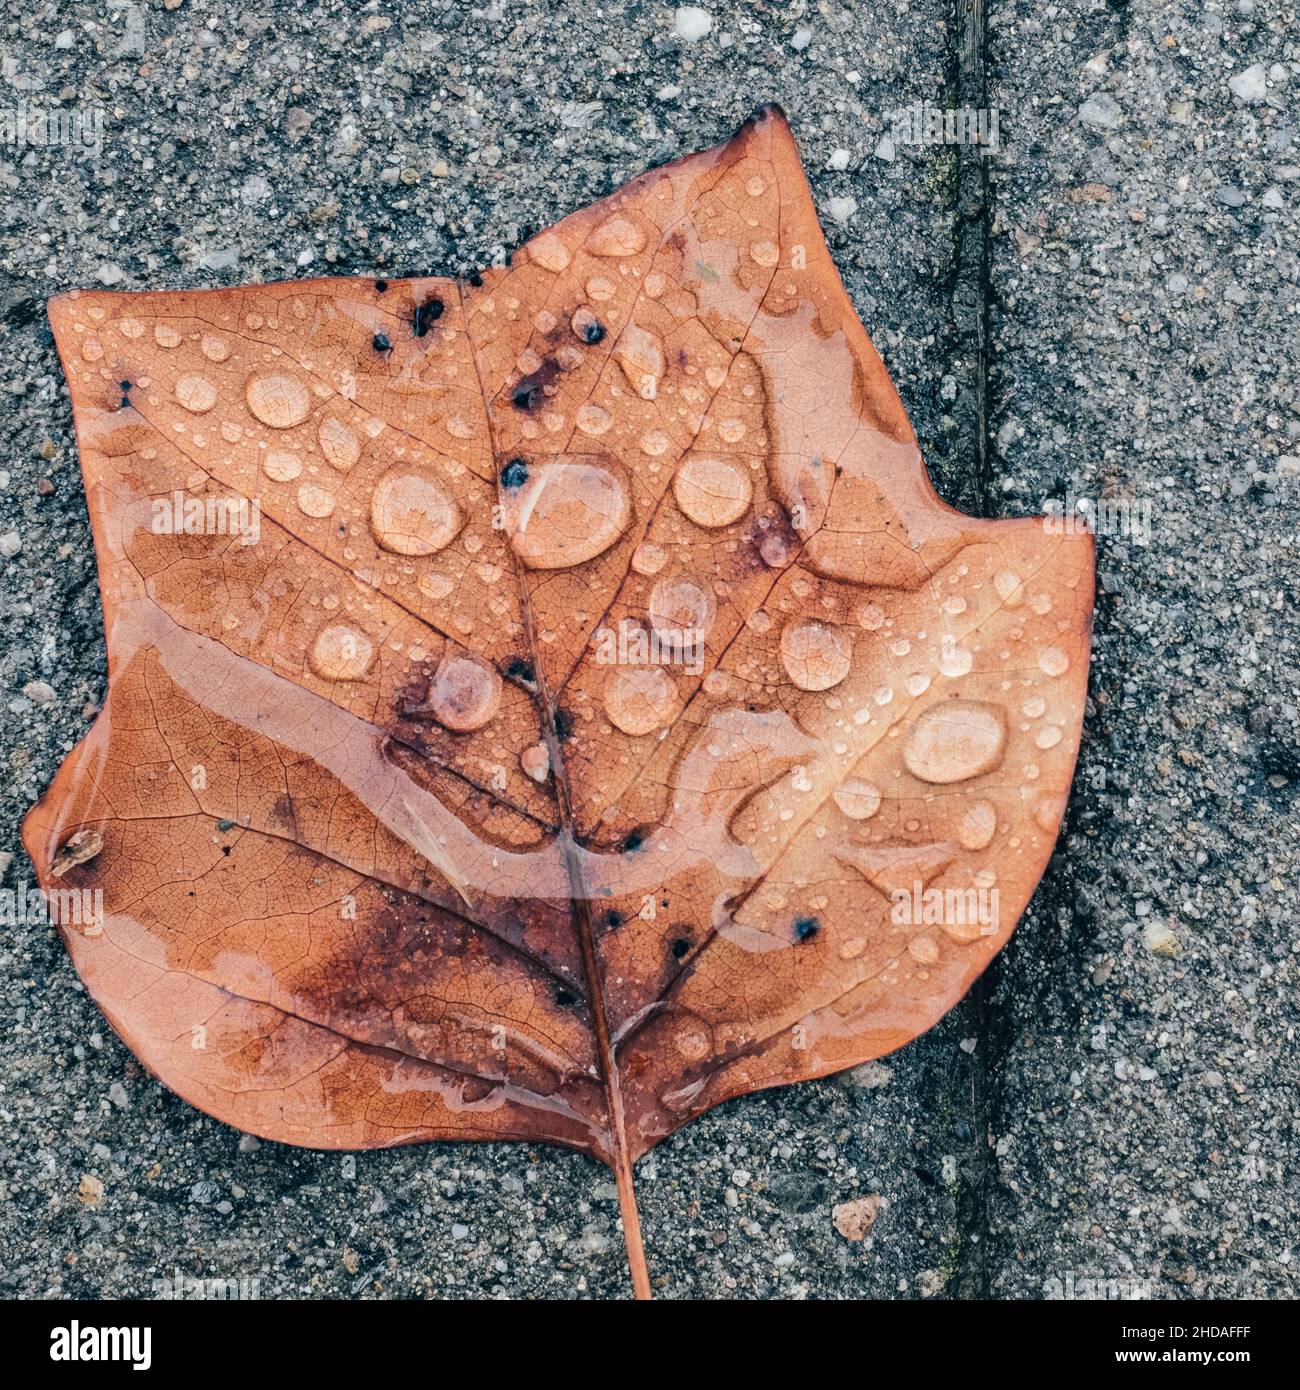 Rain drops covering a brown autumn leaf on a grey ground close up Stock Photo